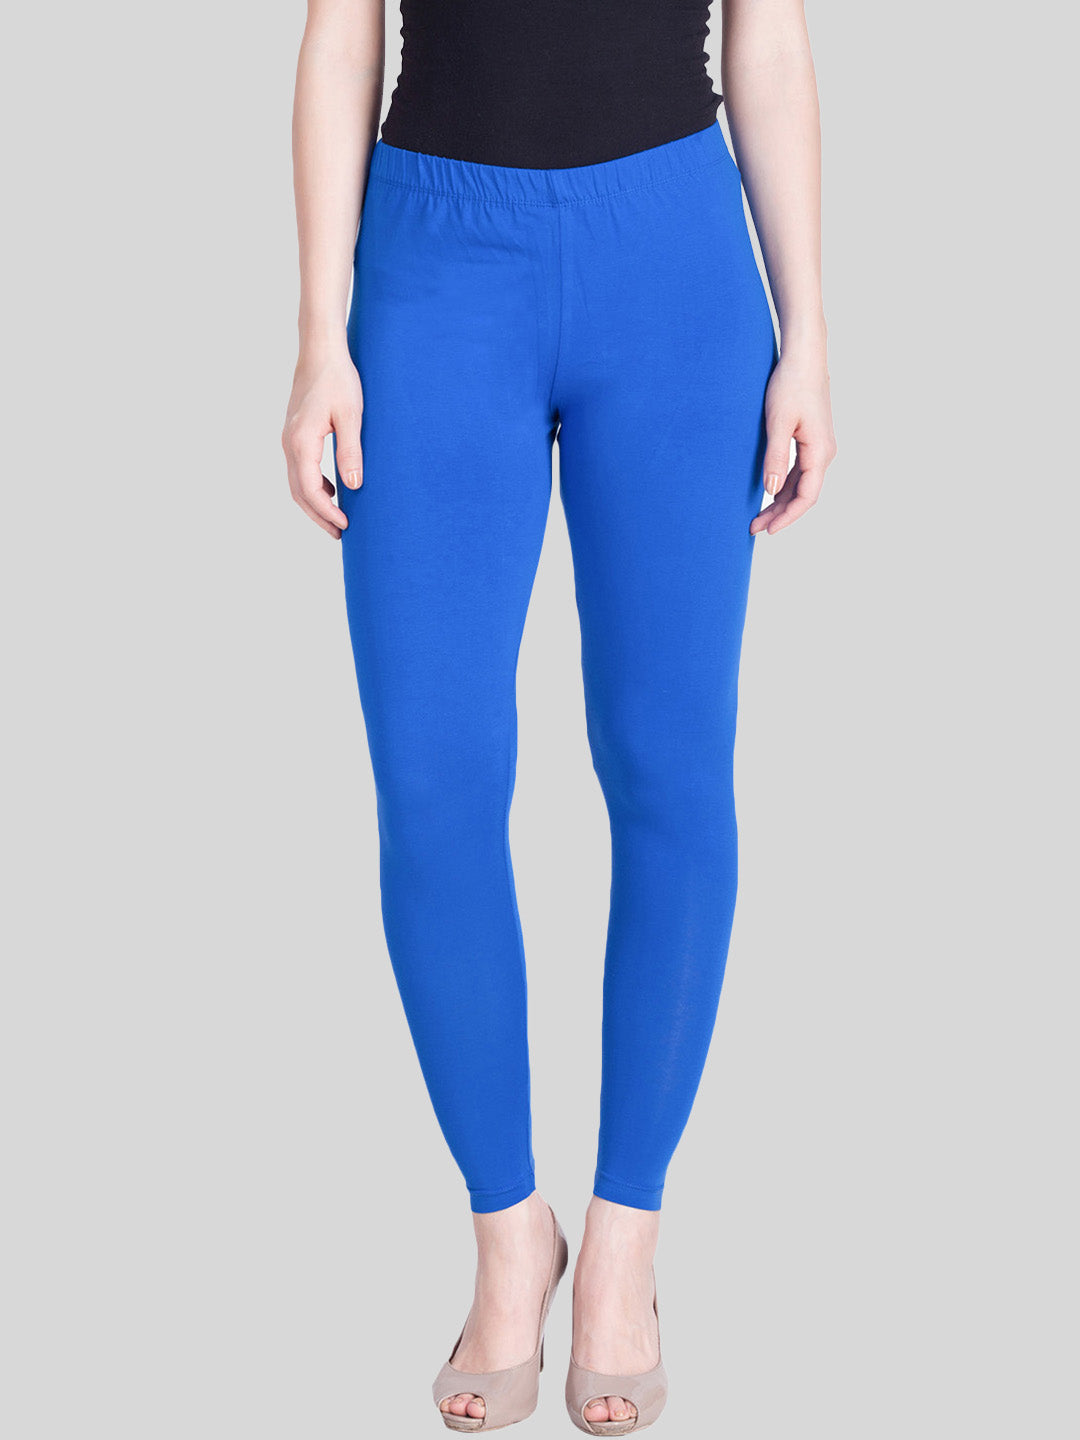 Buy online Blue Solid Ankle Length Legging from Capris & Leggings for Women  by Aurelia for ₹260 at 57% off